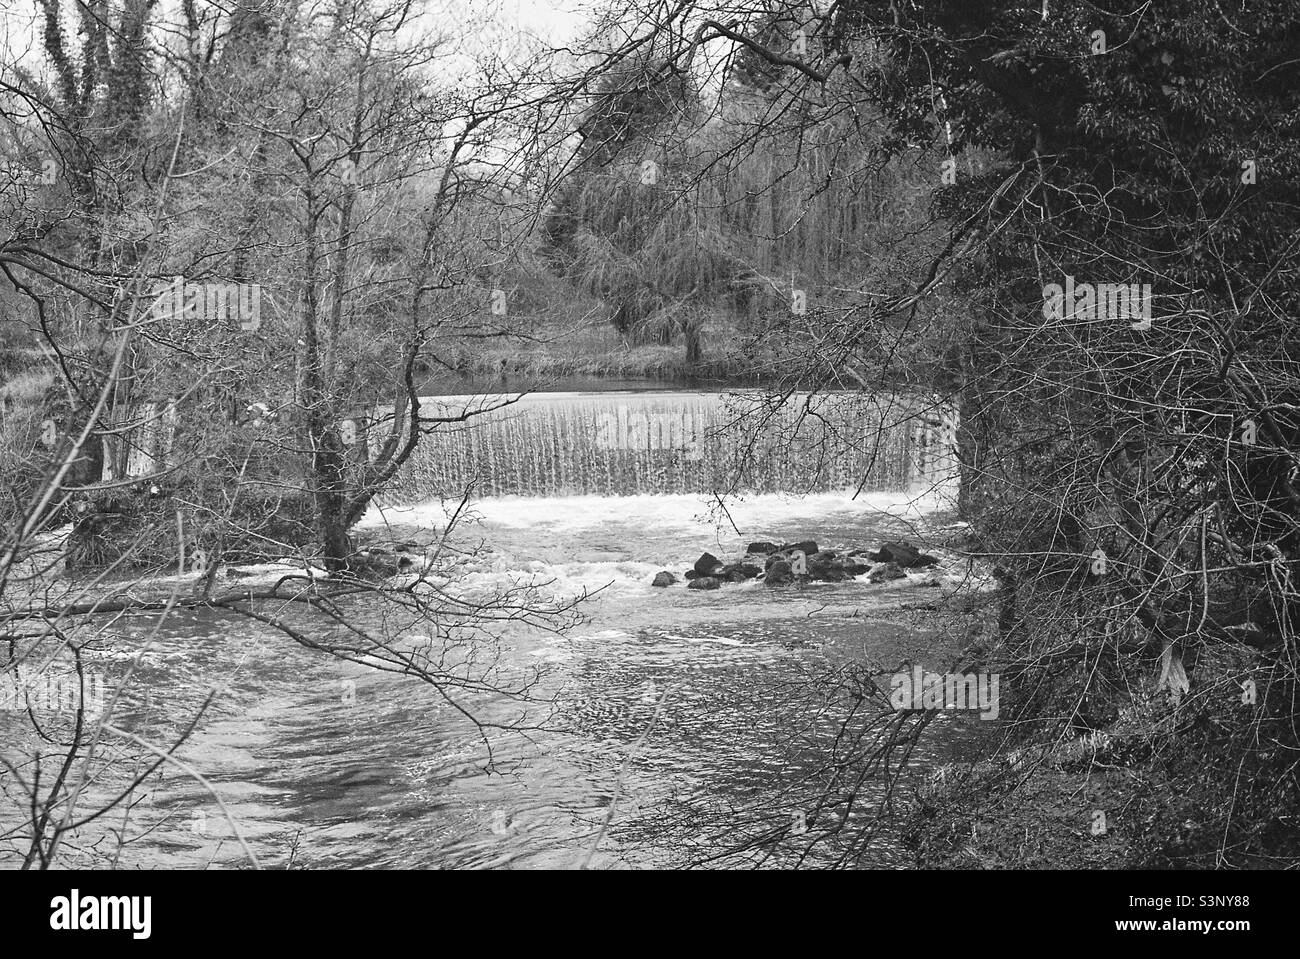 Fast flowing river over a weir Stock Photo